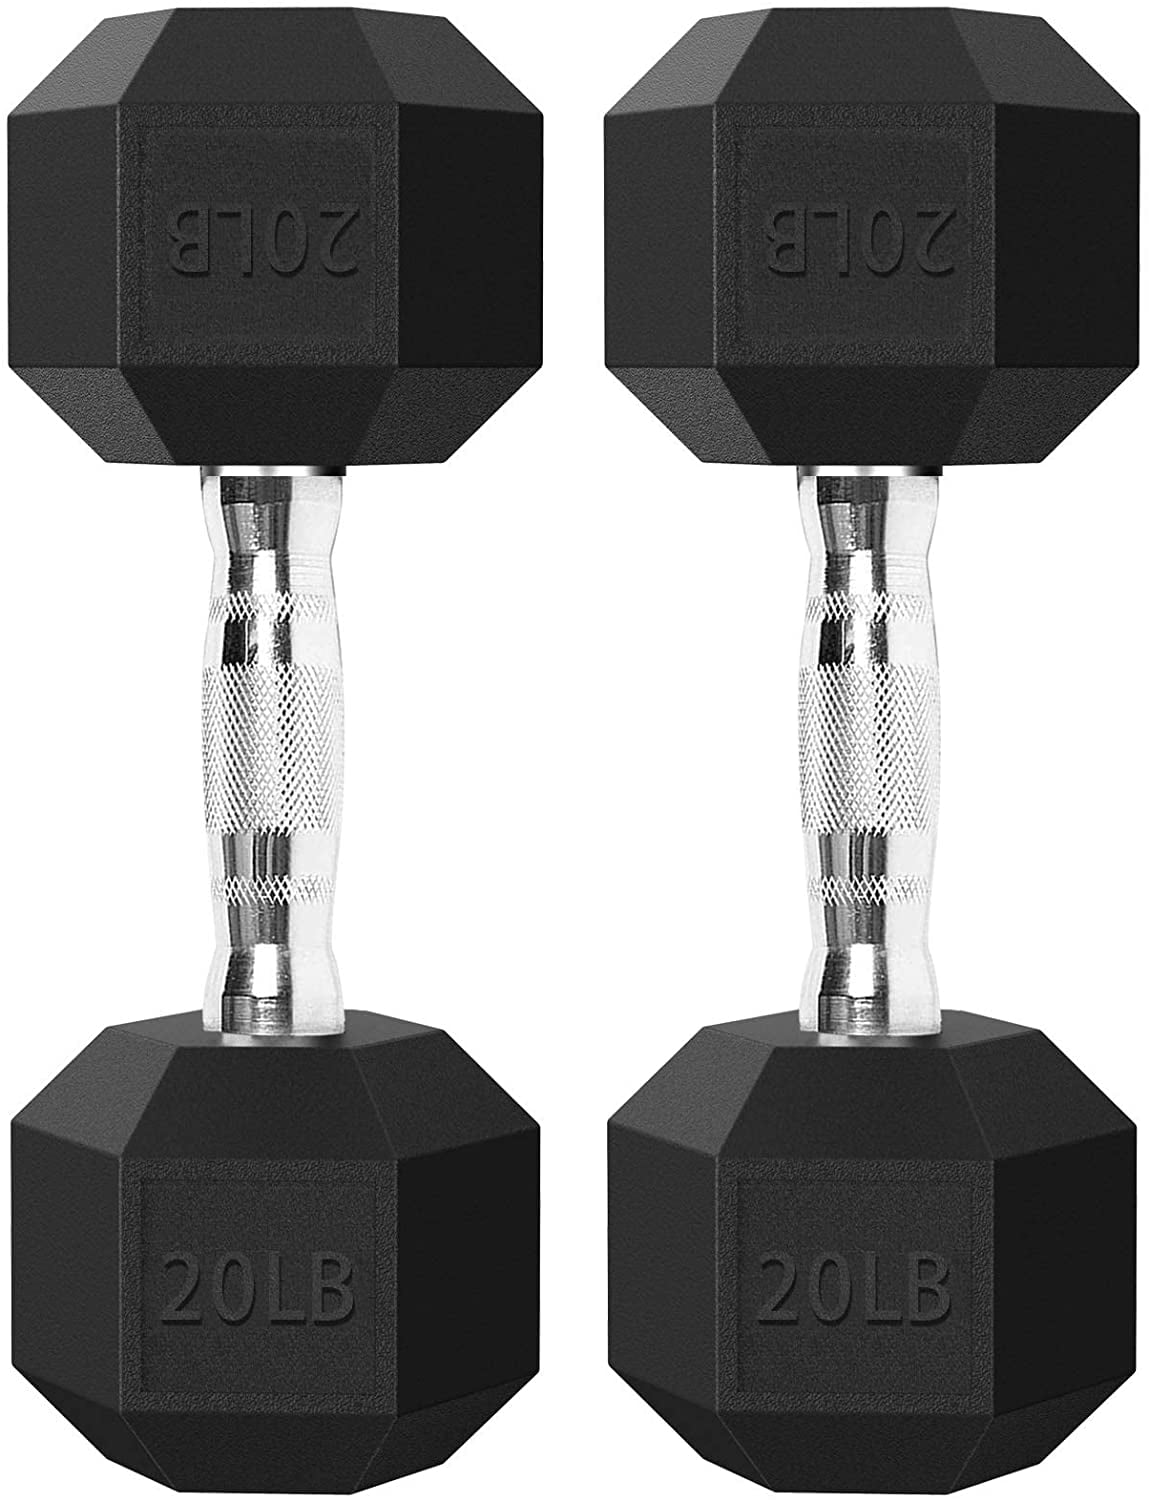 Opti 3kg Dumbell Pair FAST DELIVERY